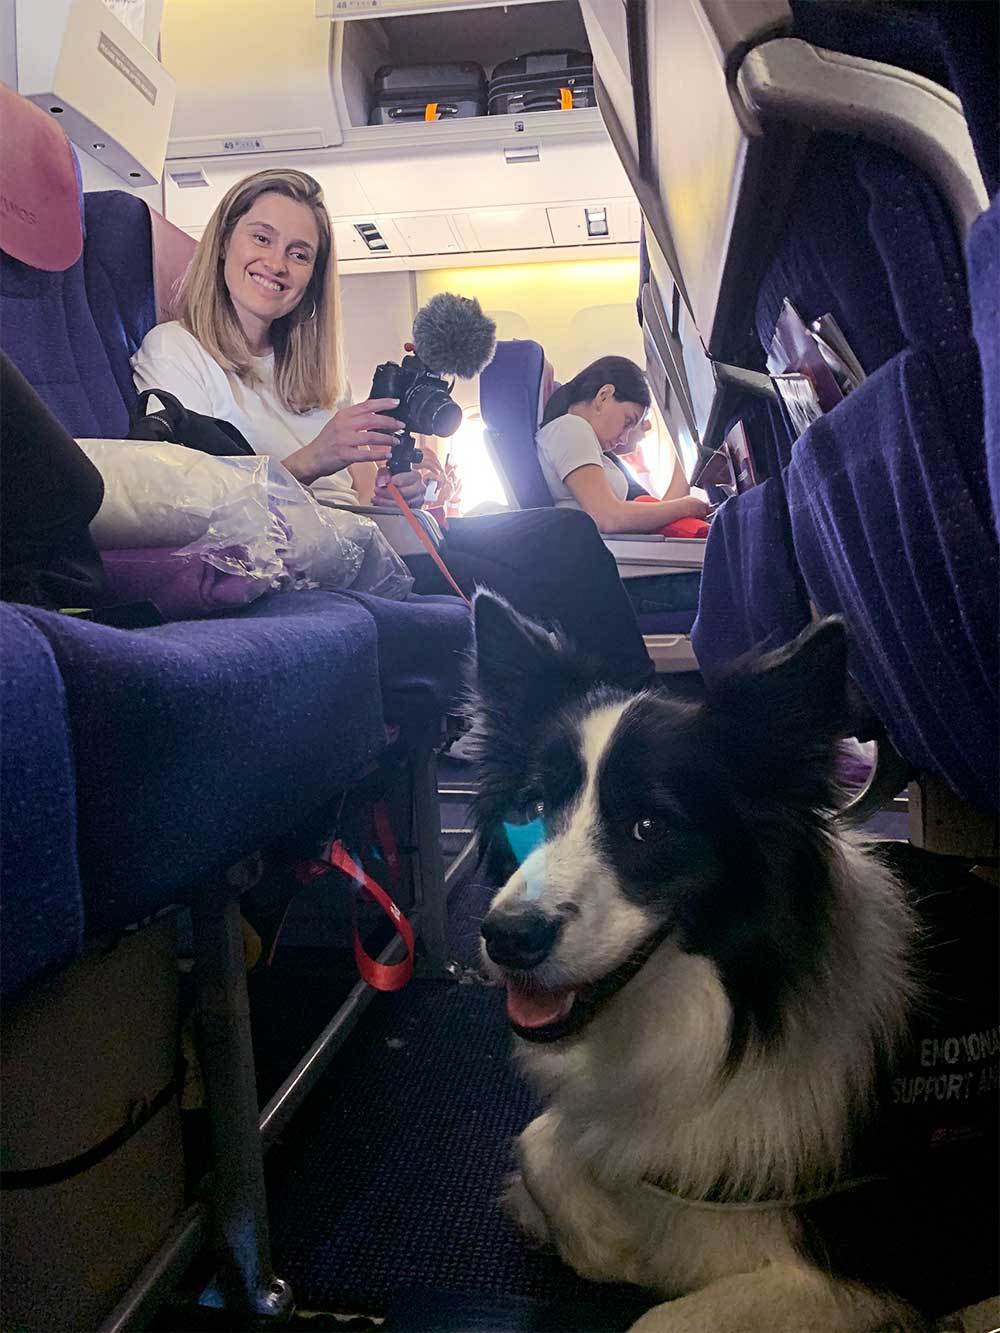 Sara and Rafa on the plane cabin during the trip to Mexico.